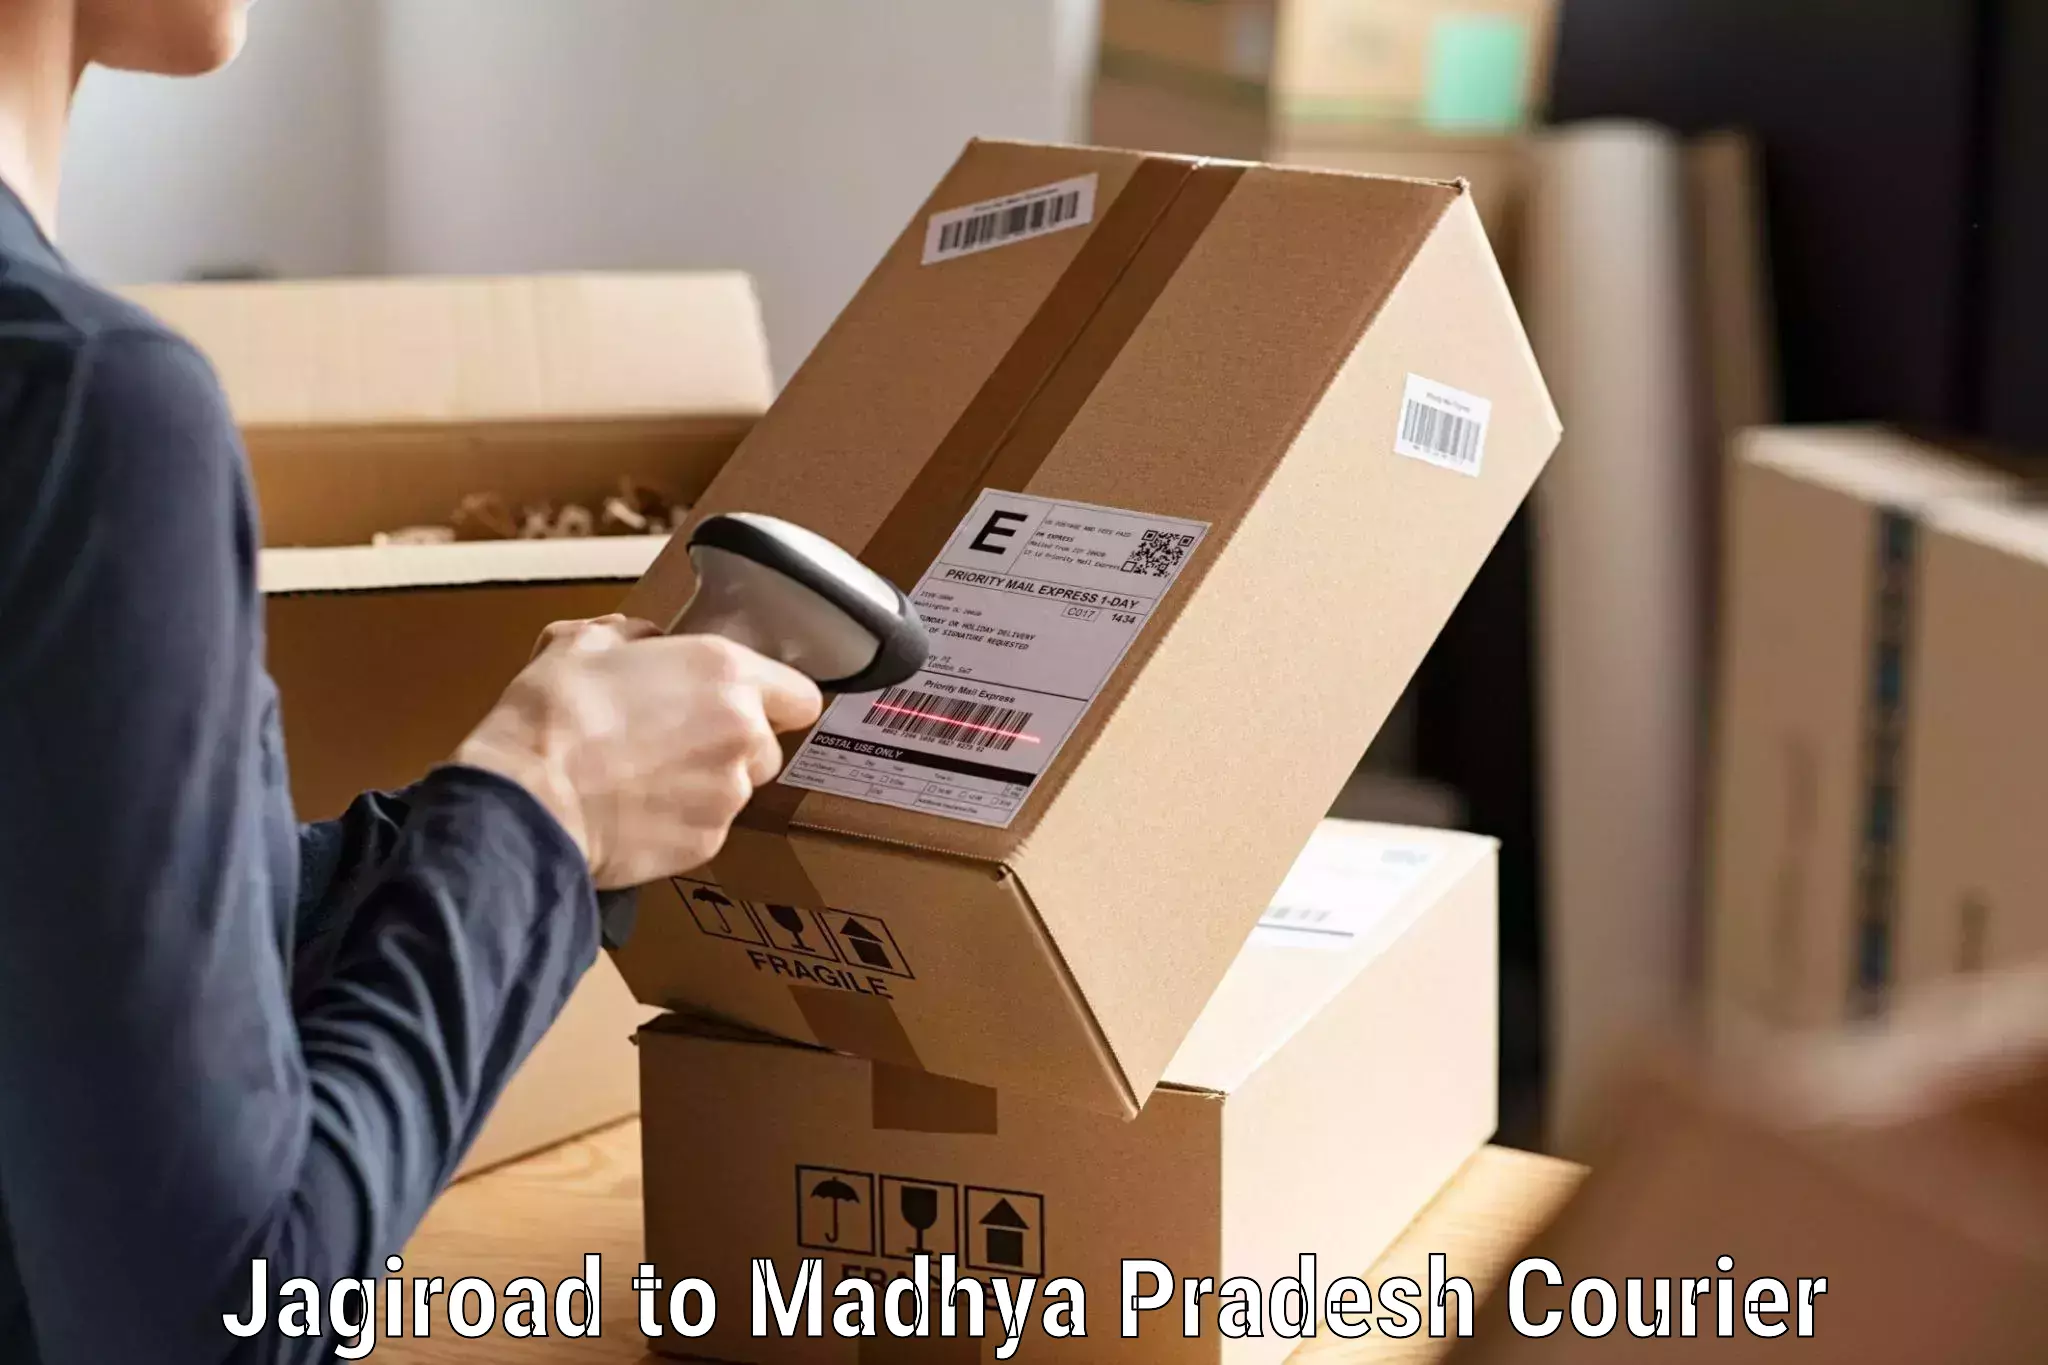 Advanced shipping services Jagiroad to IIIT Bhopal